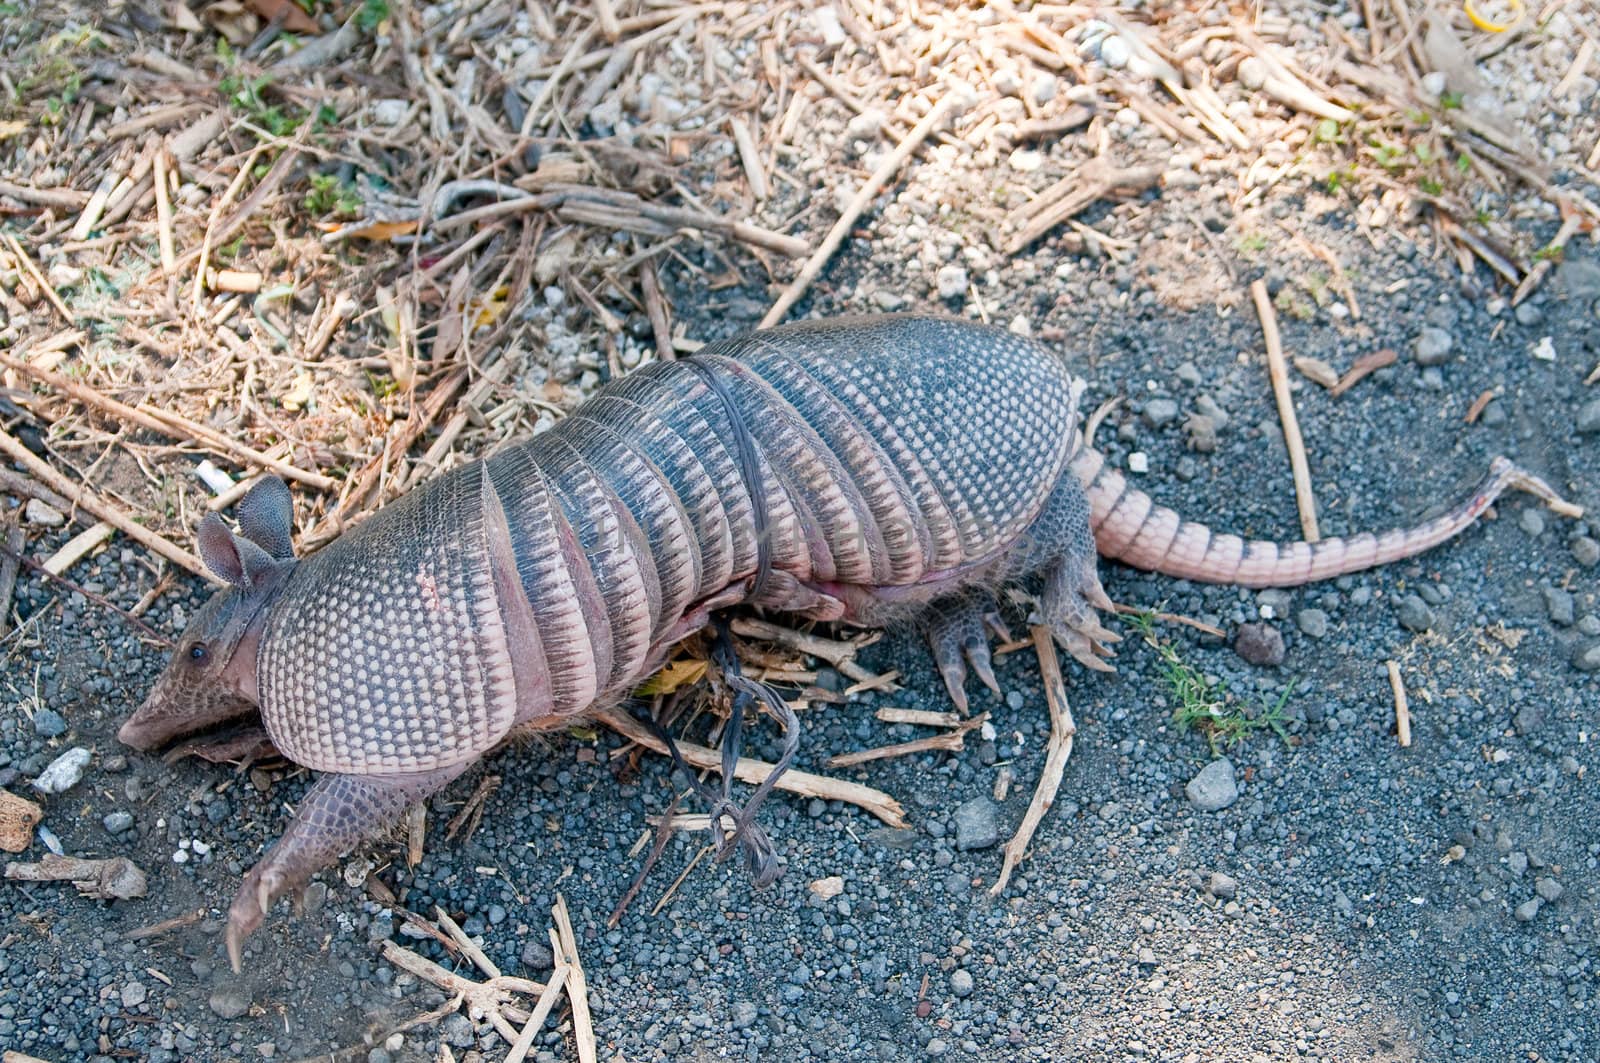 This poor armadillo was caught and was in one step from to be eaten. I have saved him!